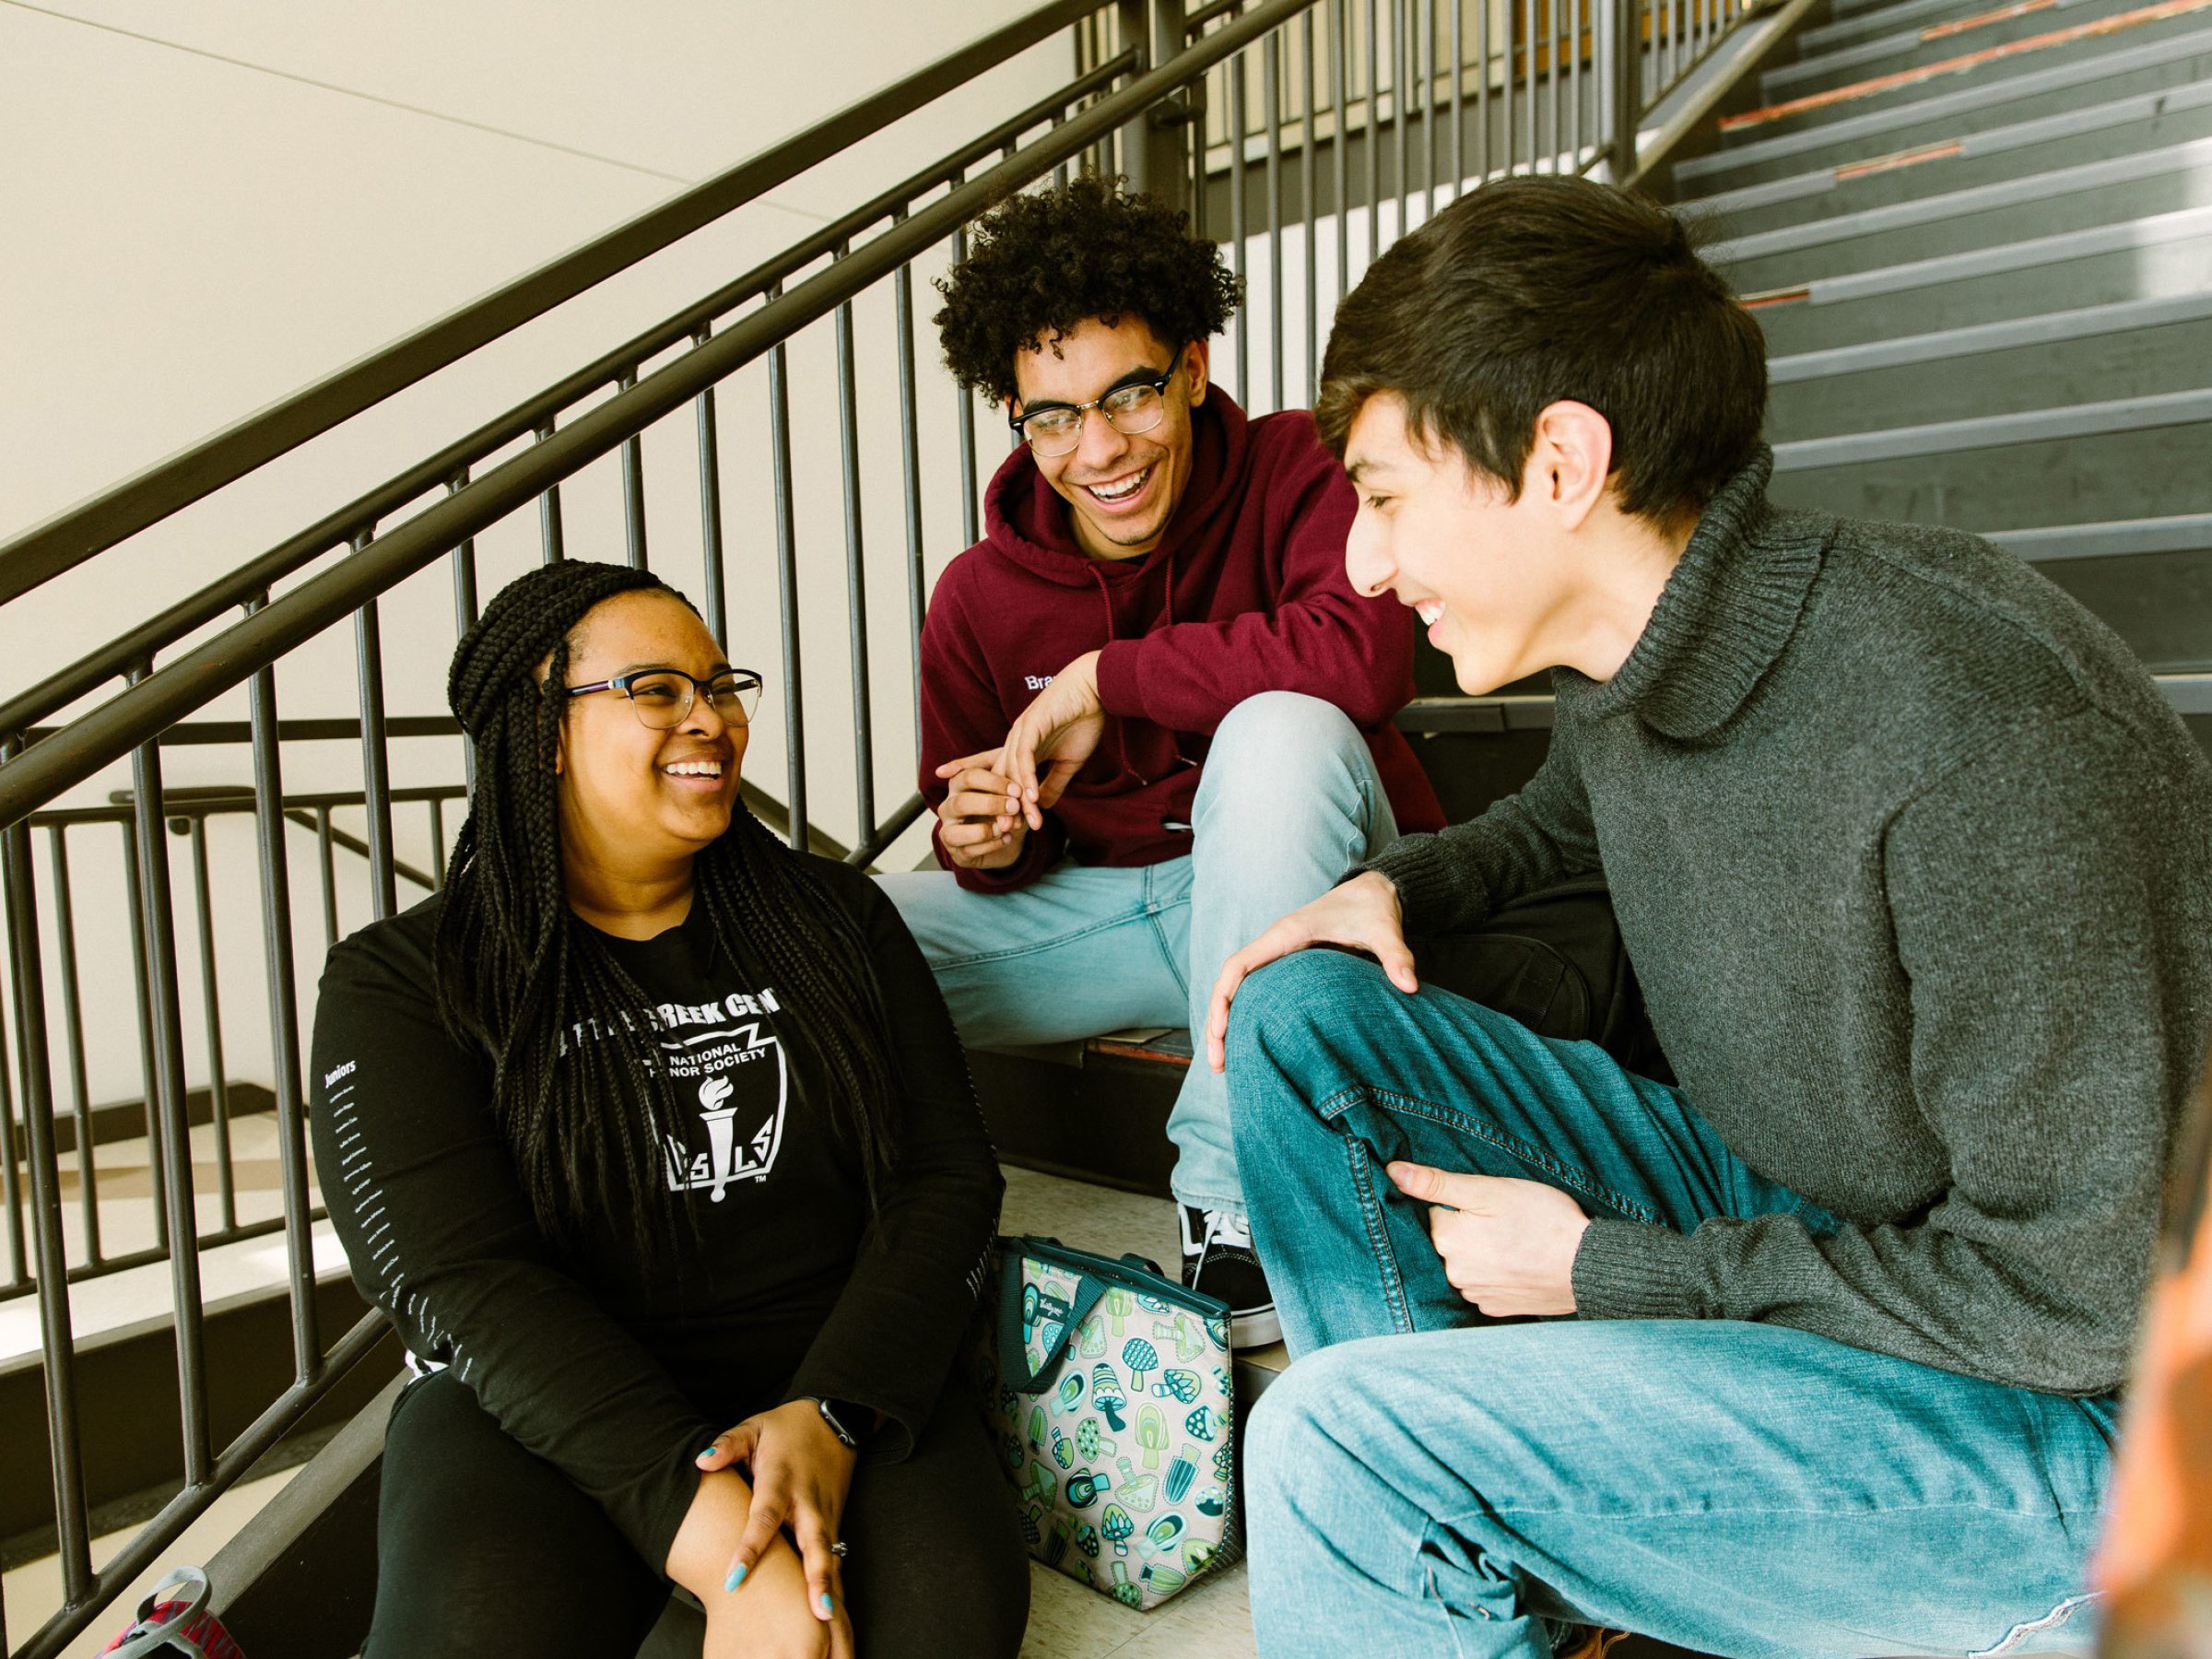 Three students engaged in conversation sitting on a stairwell